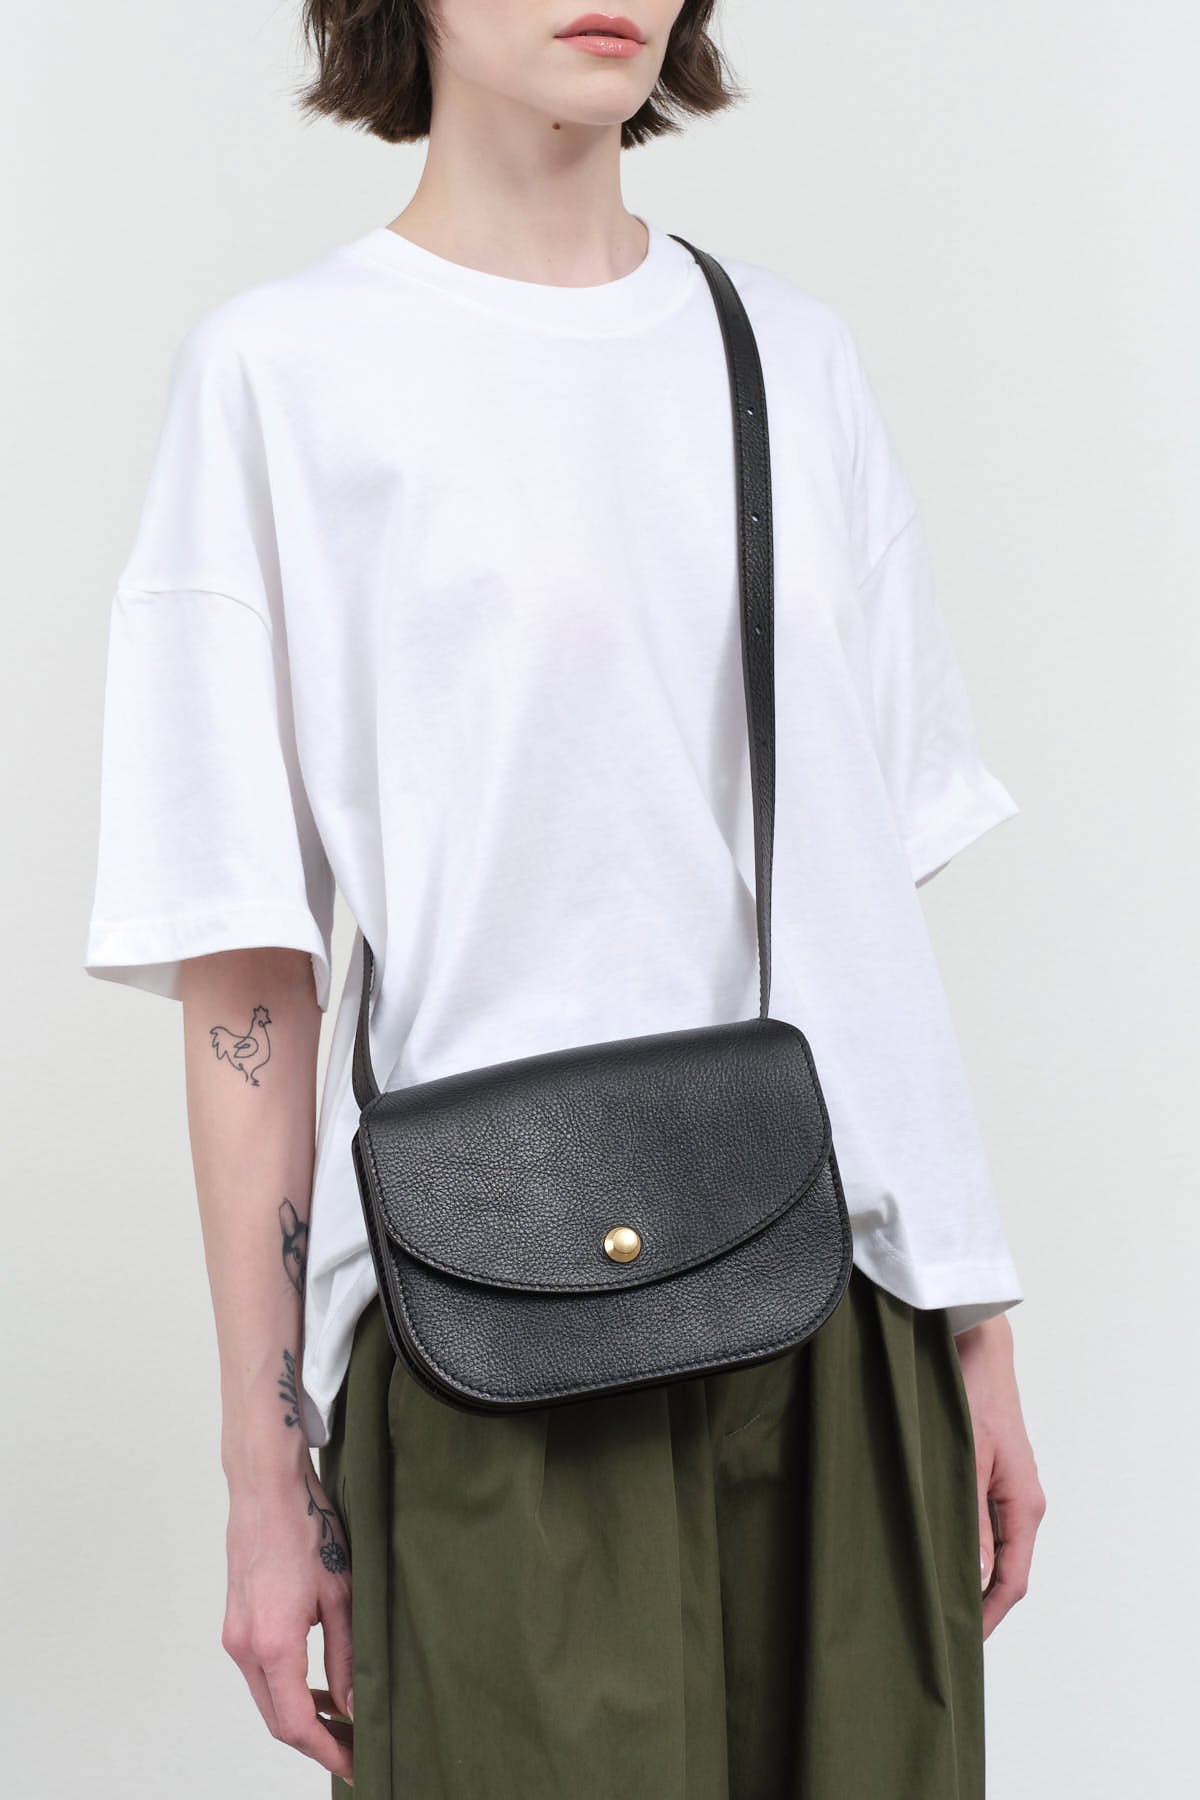 Over the shoulder view of Po Bag in Black